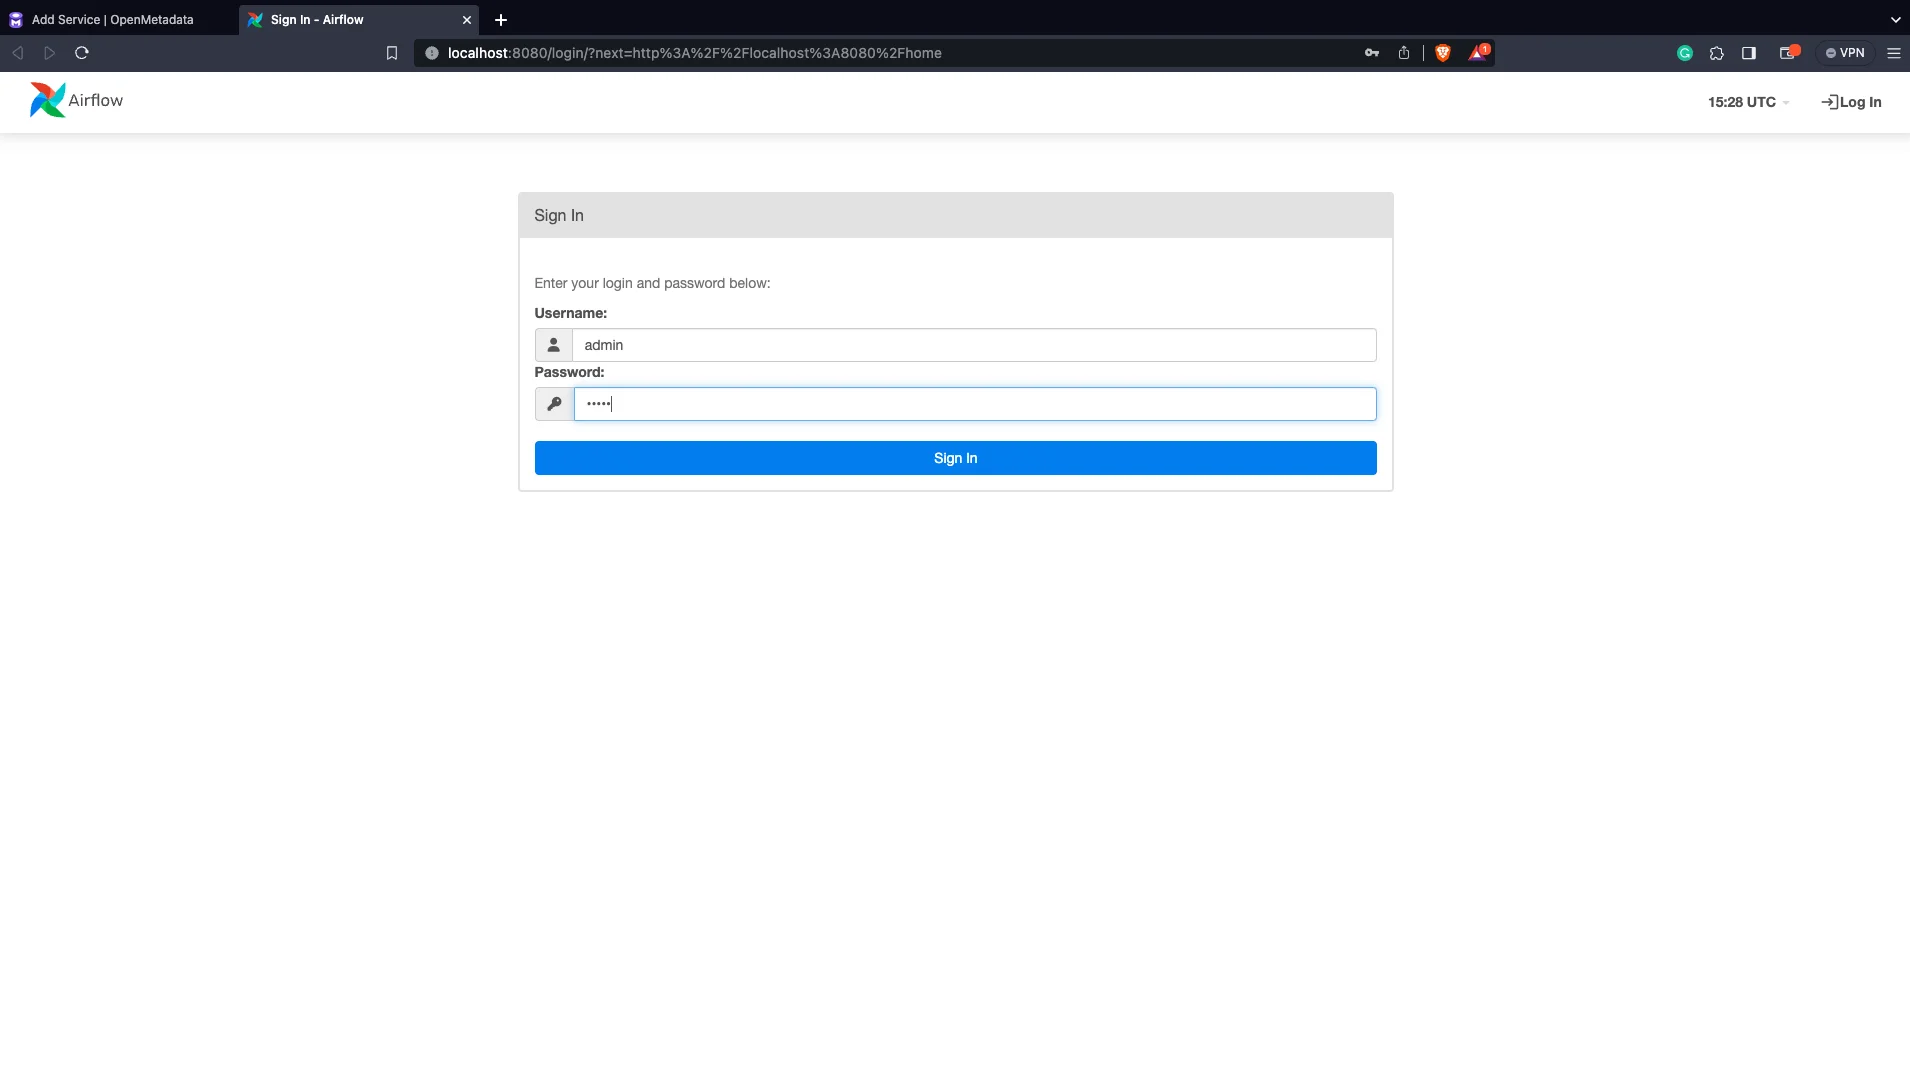 Login page in Airflow